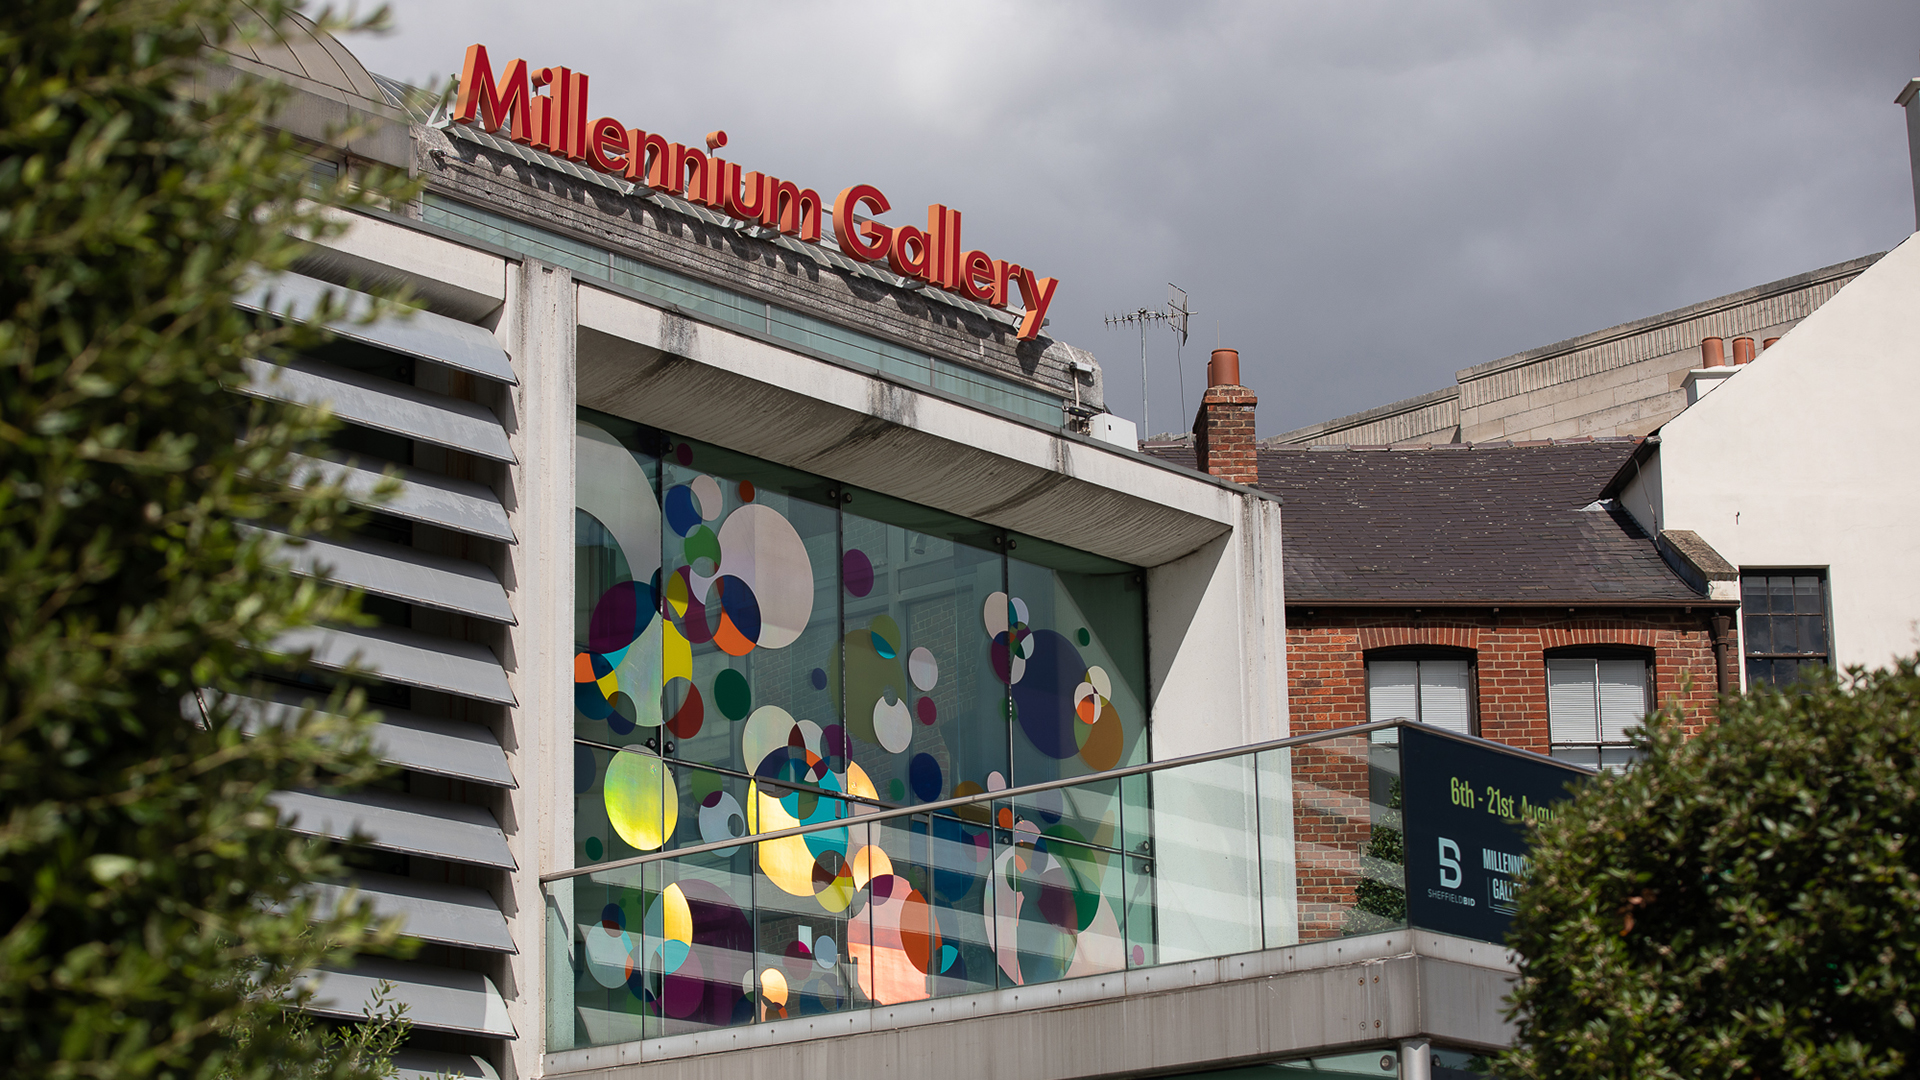 The external, upper glass door and windows of the Millennium Gallery which has multiple, multicoloured shaped dots in red, blue, yellow, green and blue on them